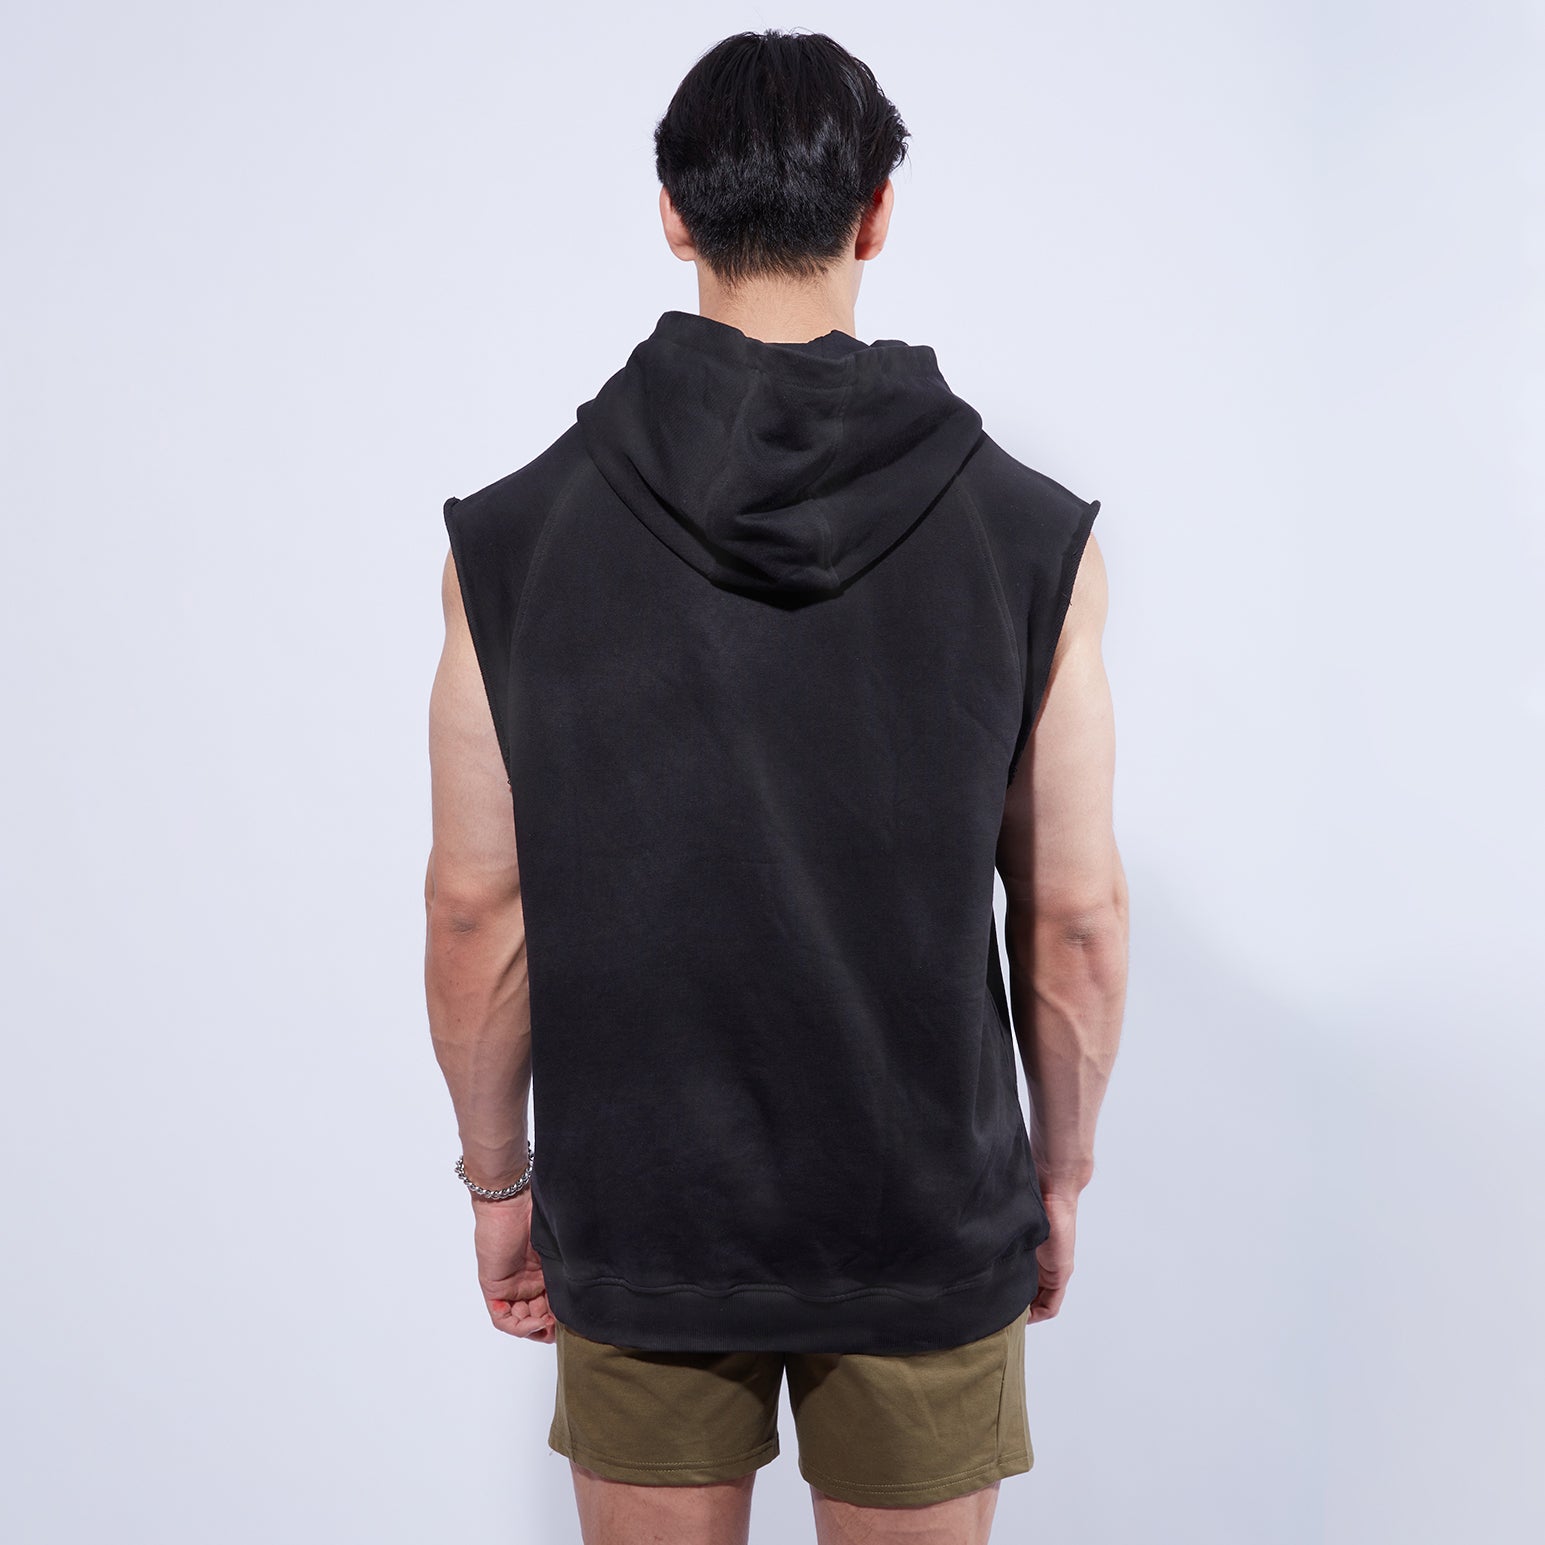 Musculo vintage washed - oversized hoodie gym tanks